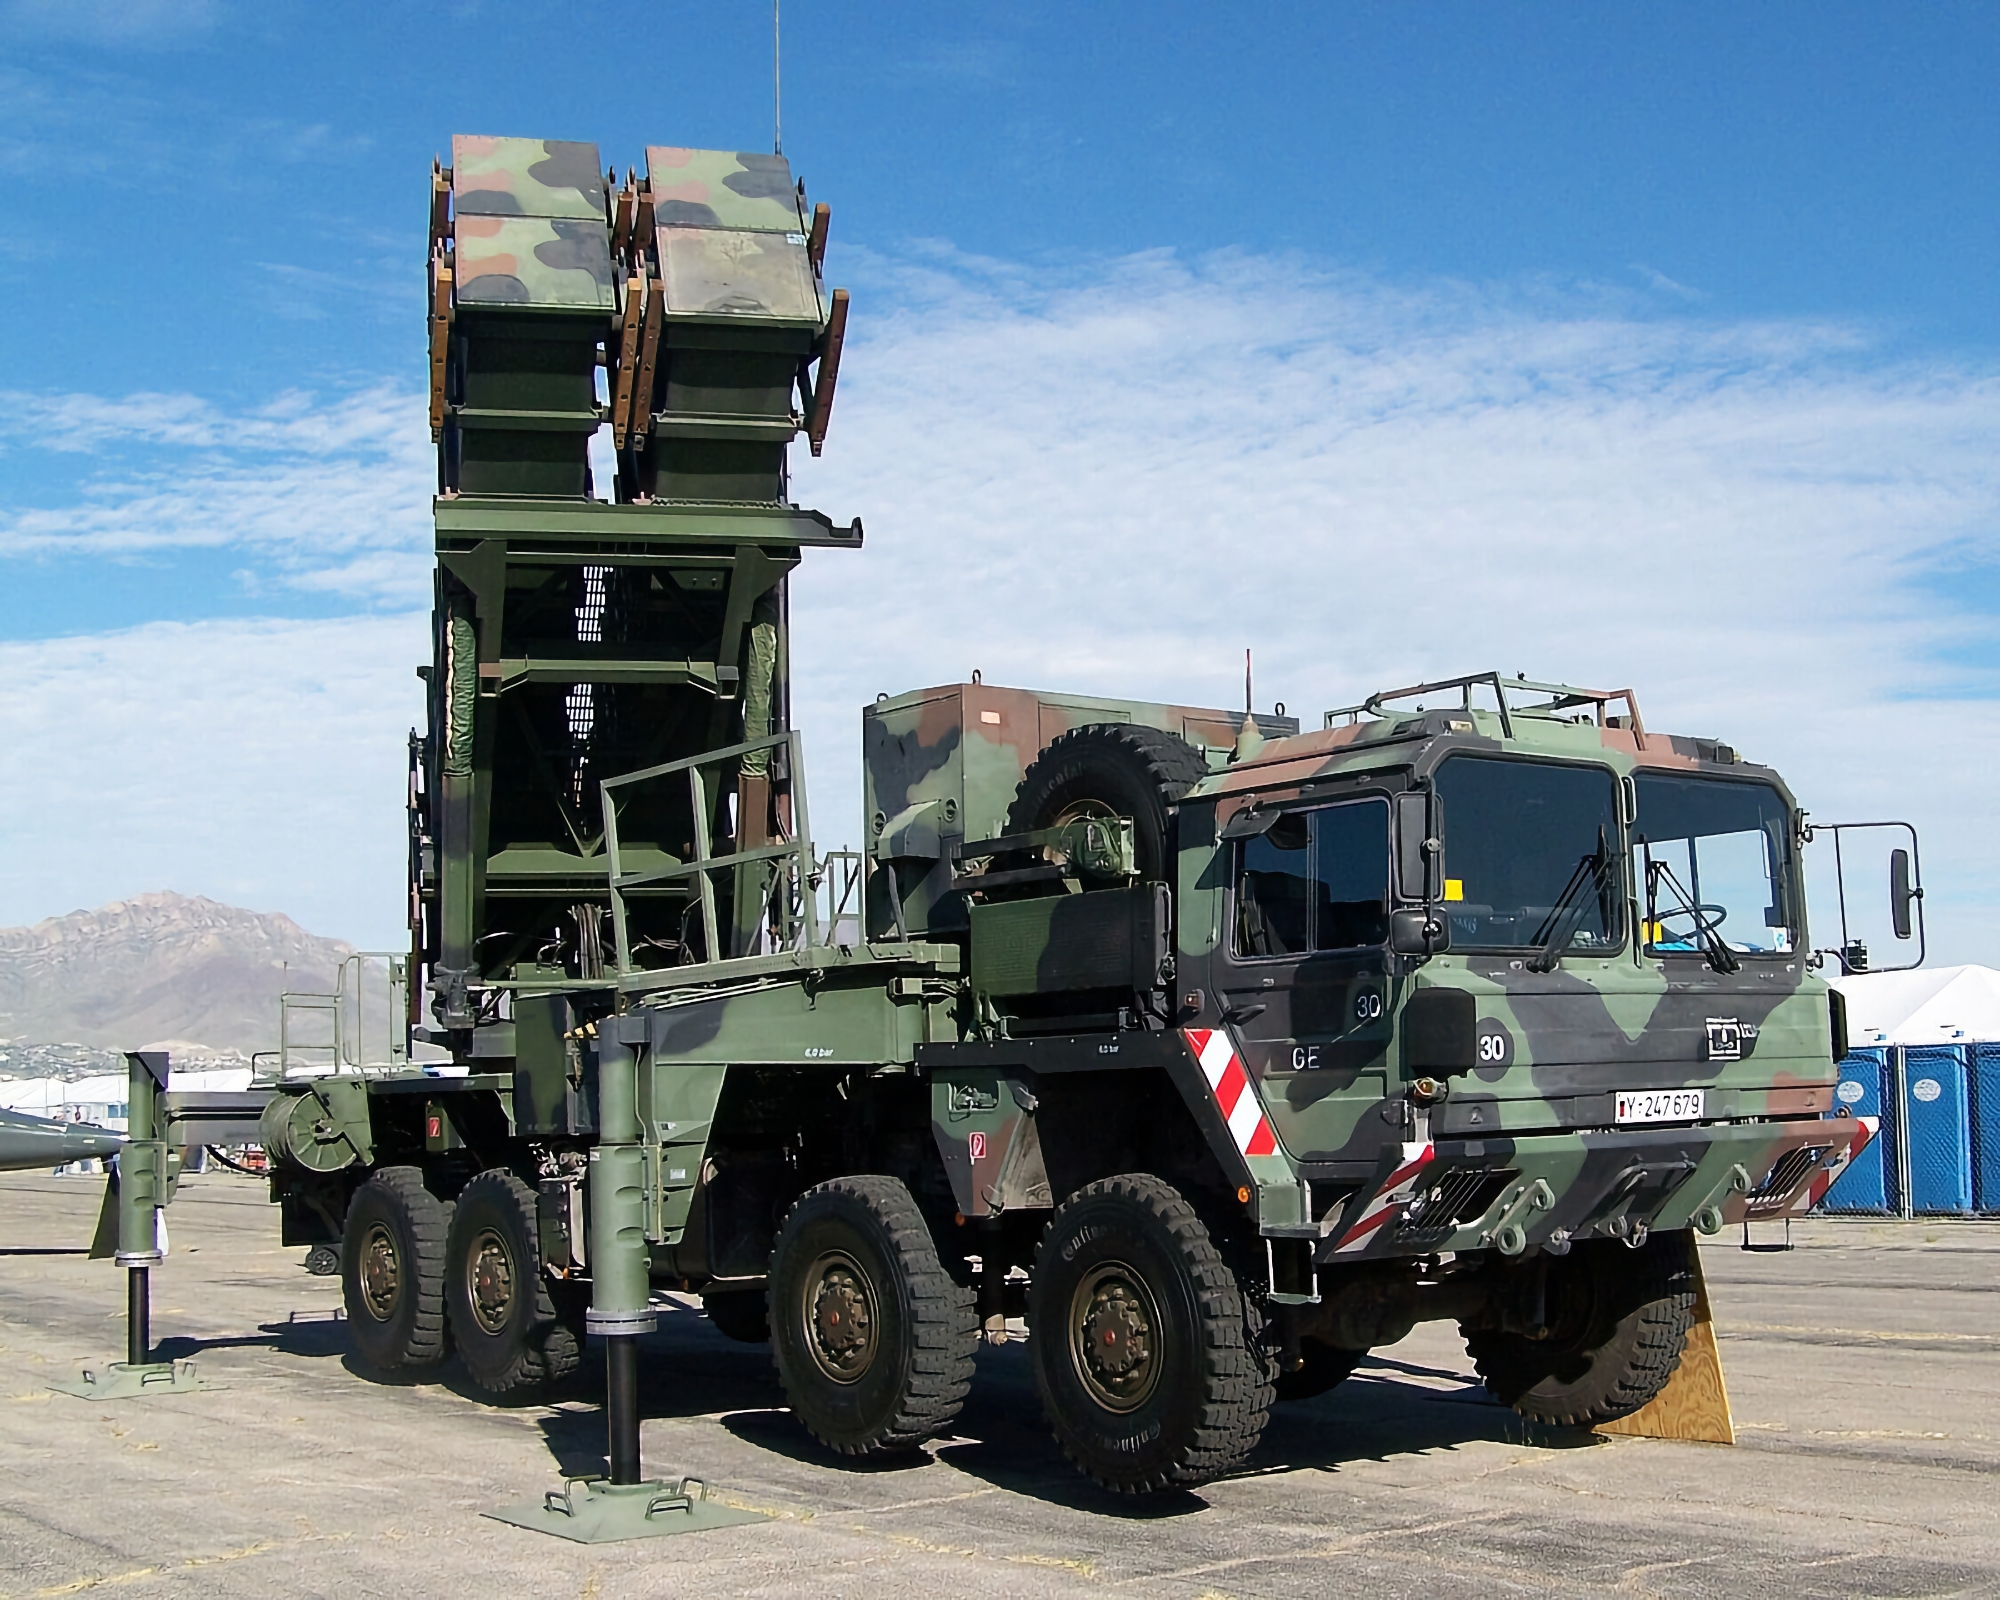 Three launchers and a radar: the Netherlands will transfer additional components for Patriot SAMs to Ukraine